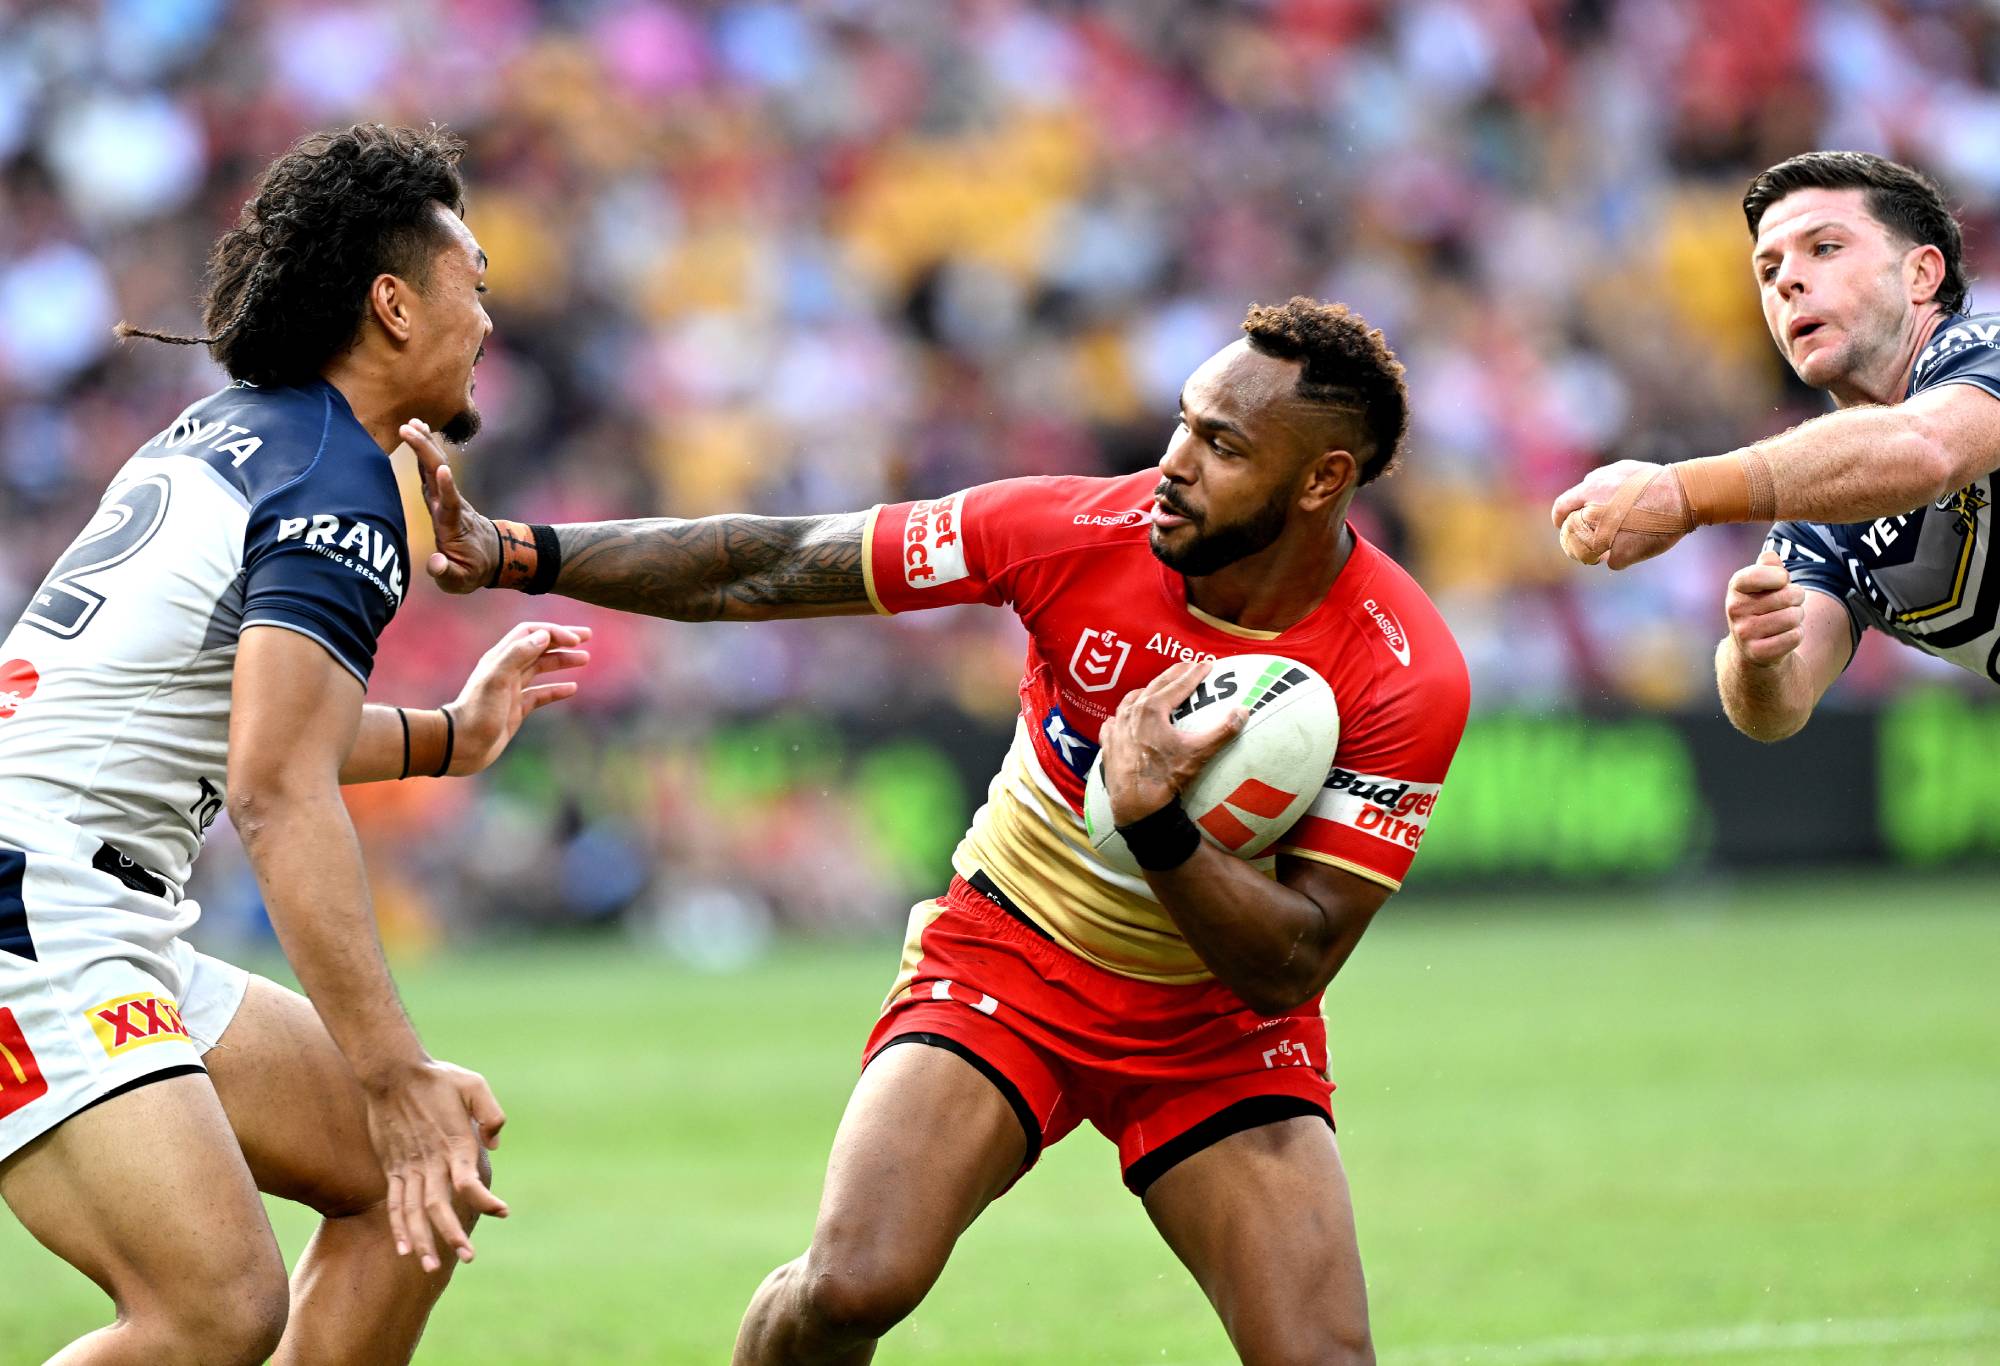 BRISBANE, AUSTRALIA - MARCH 10: Hamiso Tabuai-Fidow of the Dolphins pushes away the defence during the round one NRL match between the Dolphins and North Queensland Cowboys at Suncorp Stadium, on March 10, 2024, in Brisbane, Australia. (Photo by Bradley Kanaris/Getty Images)